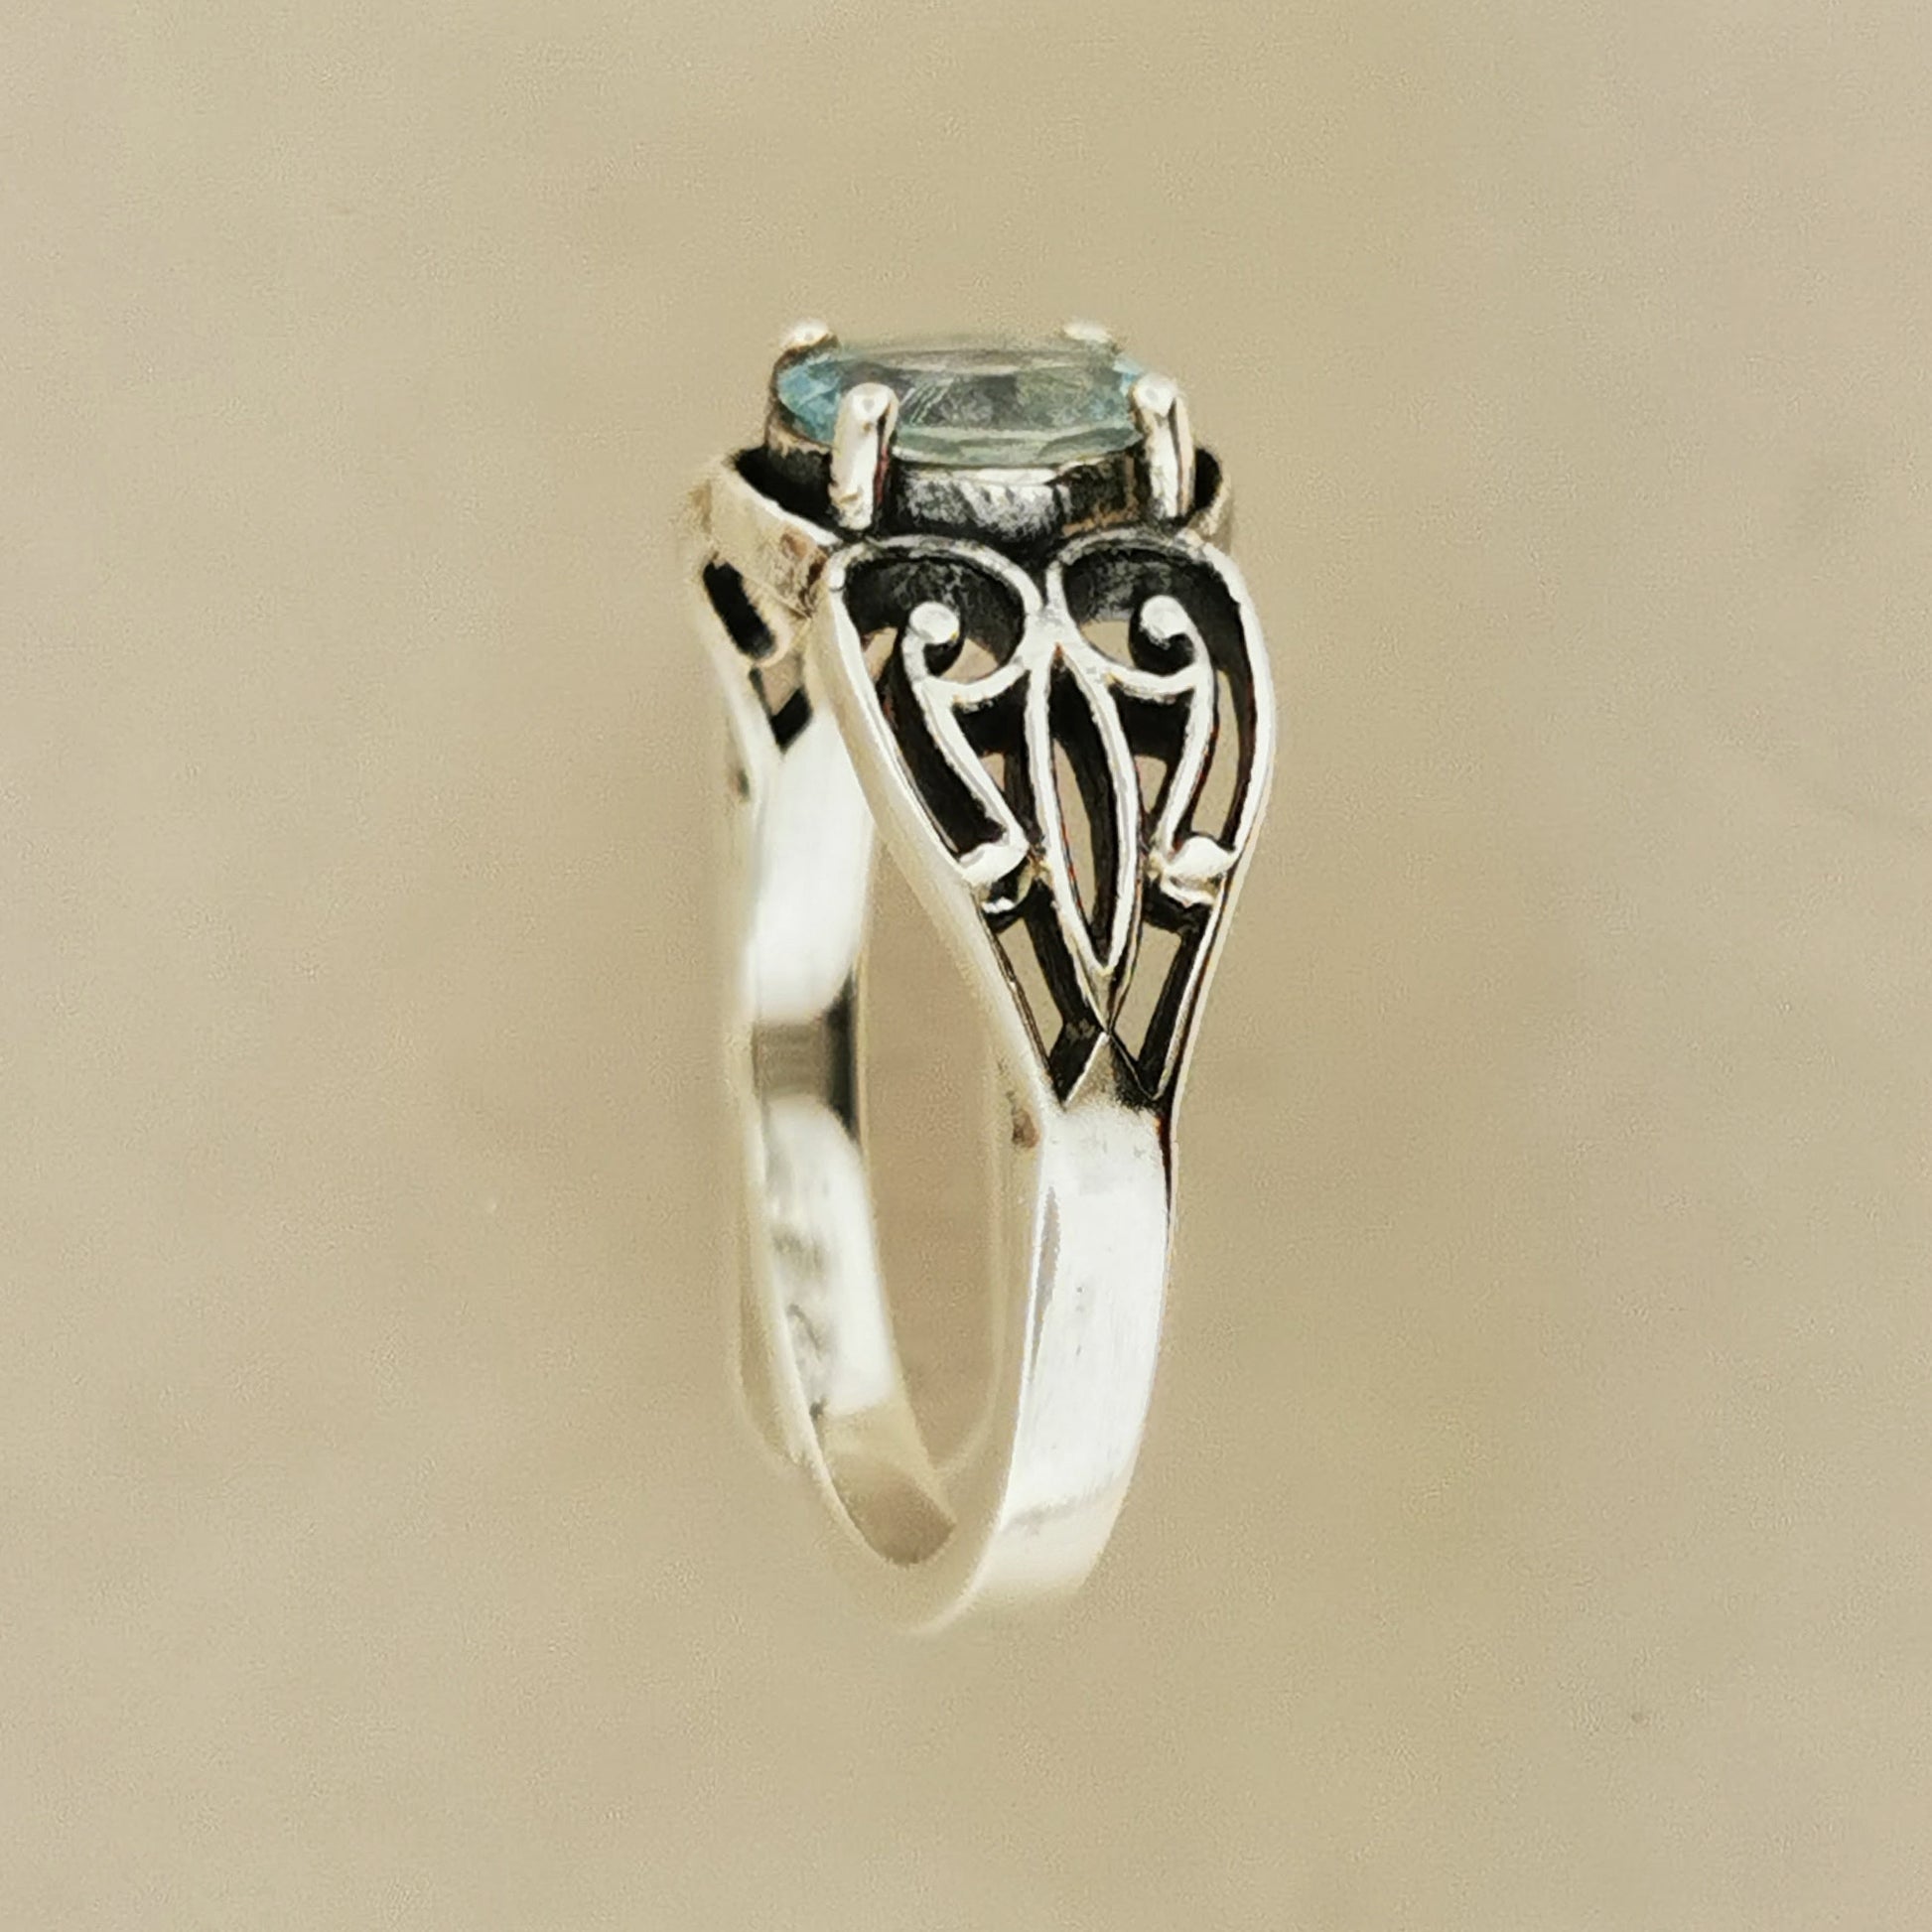 Filigree Ring with Gemstone in Sterling Silver, Gothic Style Ring, Victorian Style Ring, 1950 Vintage Style Ring, Gemstone Ring In Sterling Silver, Silver Gemstone Ring, Filigree Gemstone Ring, Vintage Gemstone Ring